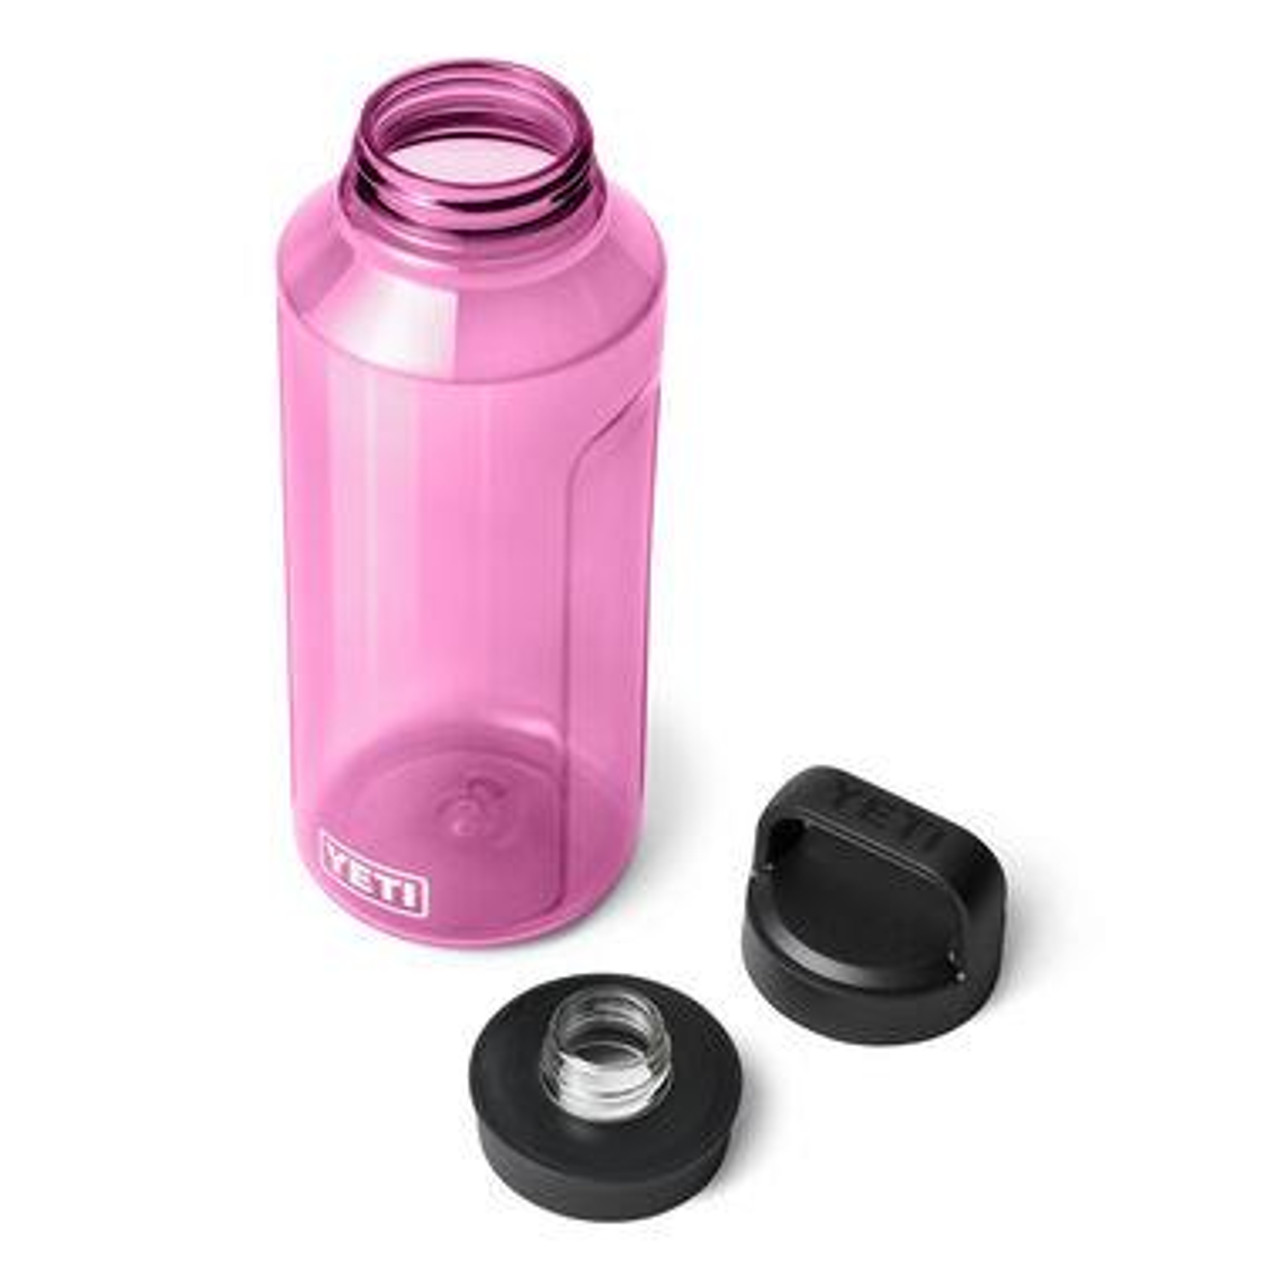 Yeti Yonder 1.5L/50oz. Water Bottle  Pink With Chug Cap - Simmons Sporting  Goods